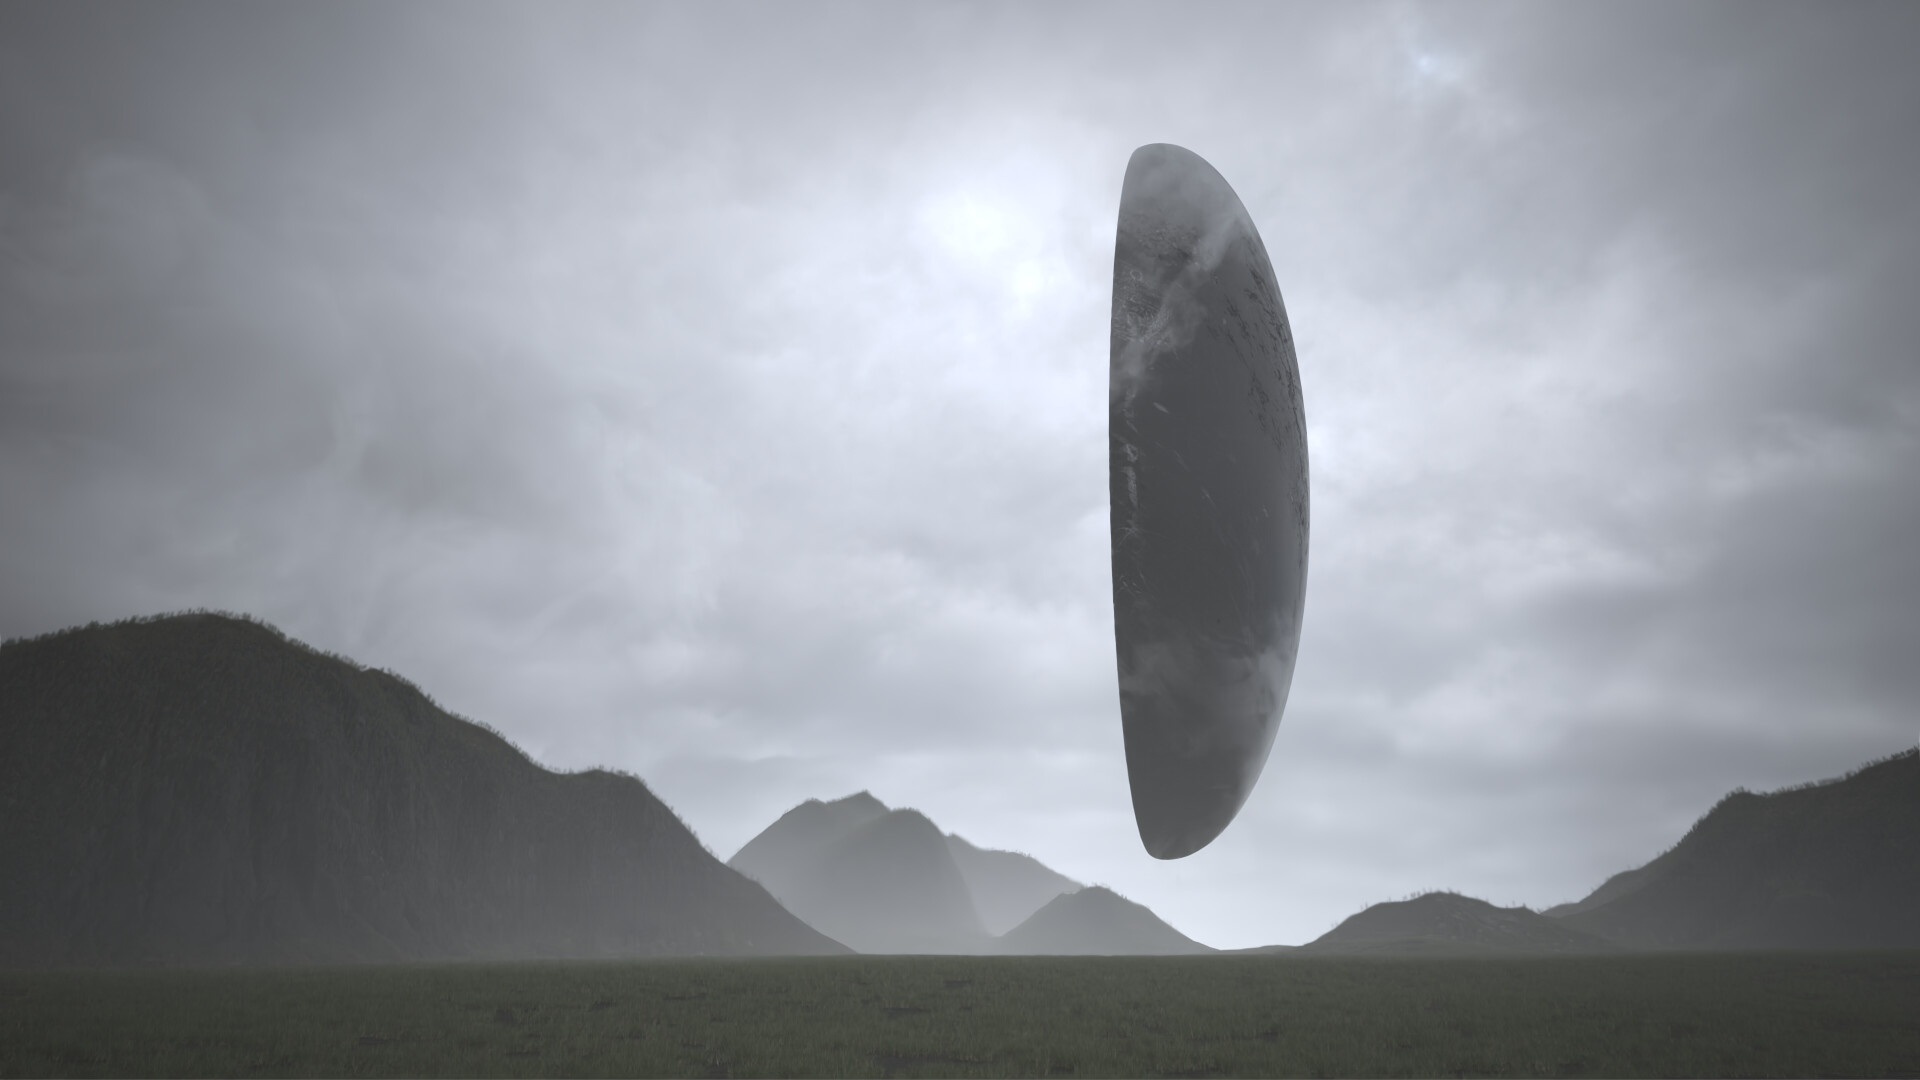 Arrival (Movie): Awarded the Ray Bradbury Award for Outstanding Dramatic Presentation and the Hugo Award for Best Dramatic Presentation in 2017. 1920x1080 Full HD Background.